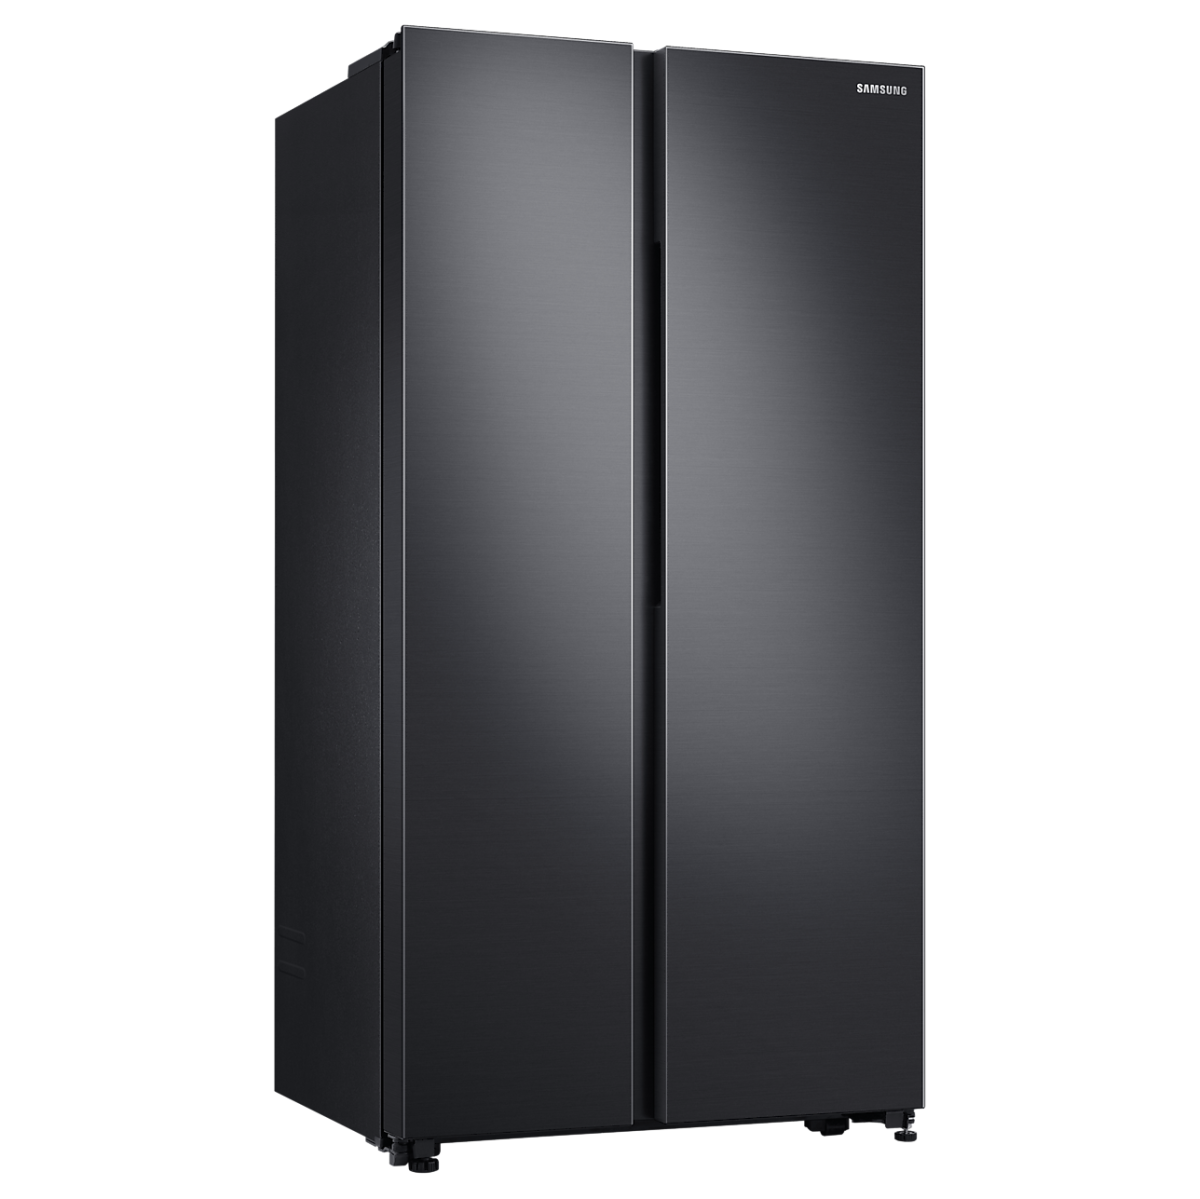 SAMSUNG 700 Liter Inverter Refrigerator with SpaceMax Technology RS72R5011B4/D2 , Best Refrigerators of Year, Top-rated Refrigerators, Refrigerator Reviews, Refrigerator Comparison, Buying a Refrigerator Guide, Refrigerator Deals and Offers Best Refrigerators of Year, Top-rated Refrigerators, Refrigerator Reviews, Refrigerator Comparison, Buying a Refrigerator Guide, Refrigerator Deals and Offers, Best refrigerators in Chittagong, Best selling refrigerators in Chittagong, Best Electronics Store in Chittagong, Meem Electronics, MeemElectronics, Best Deal of Refrigerator, SAMSUNG Refrigerator price in Chittagong, SAMSUNG Refrigerator price in Bangladersh, 700 Liter Refrigerator, SAMSUNG Refrigerator, 01919382008, 01919382009, 019193820010